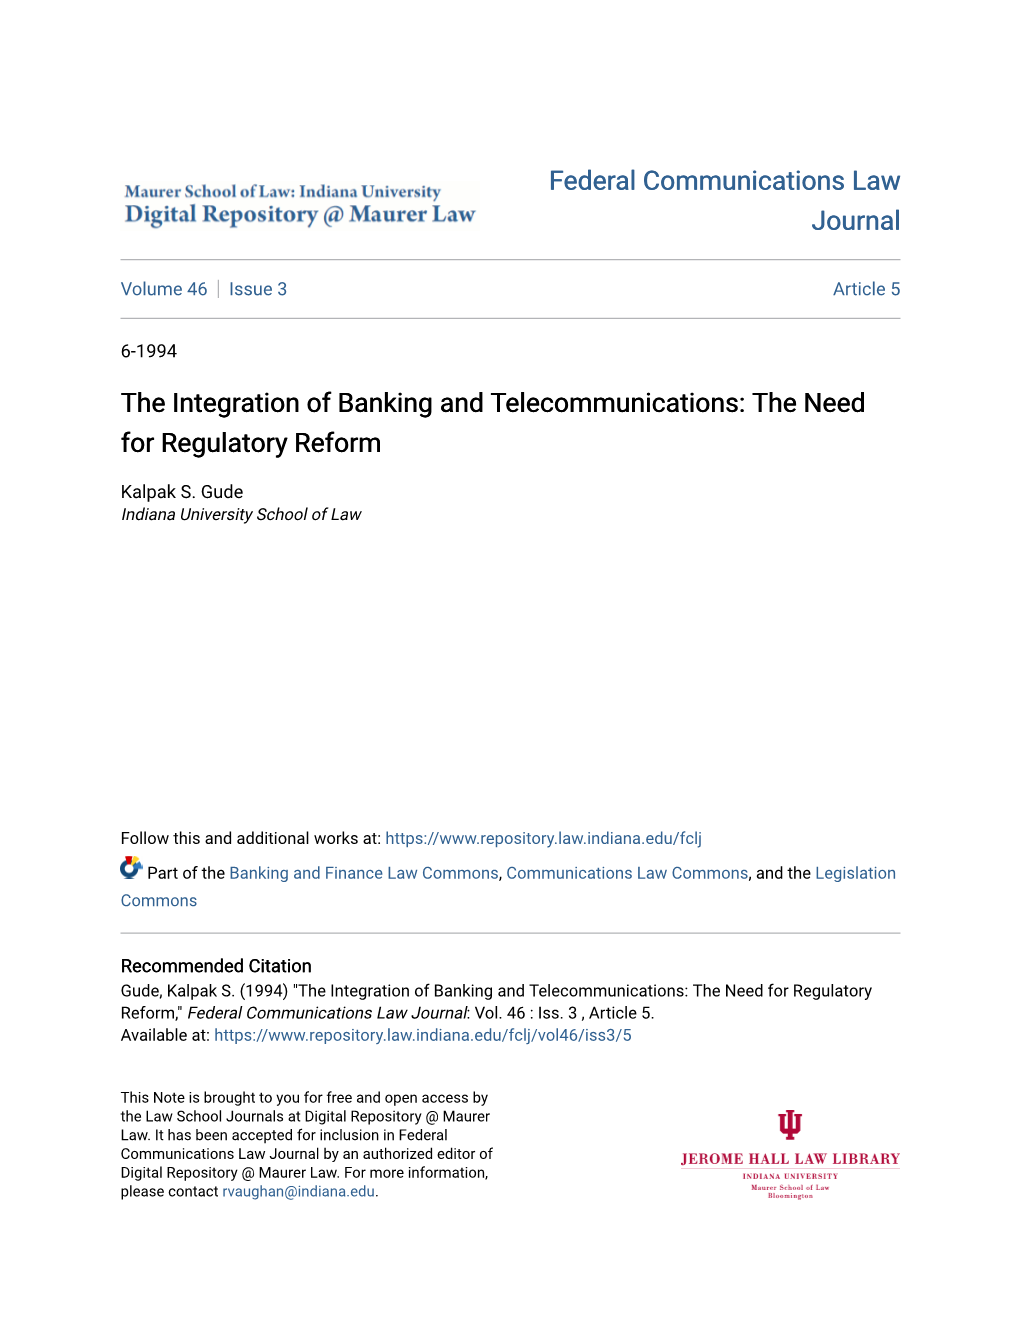 The Integration of Banking and Telecommunications: the Need for Regulatory Reform